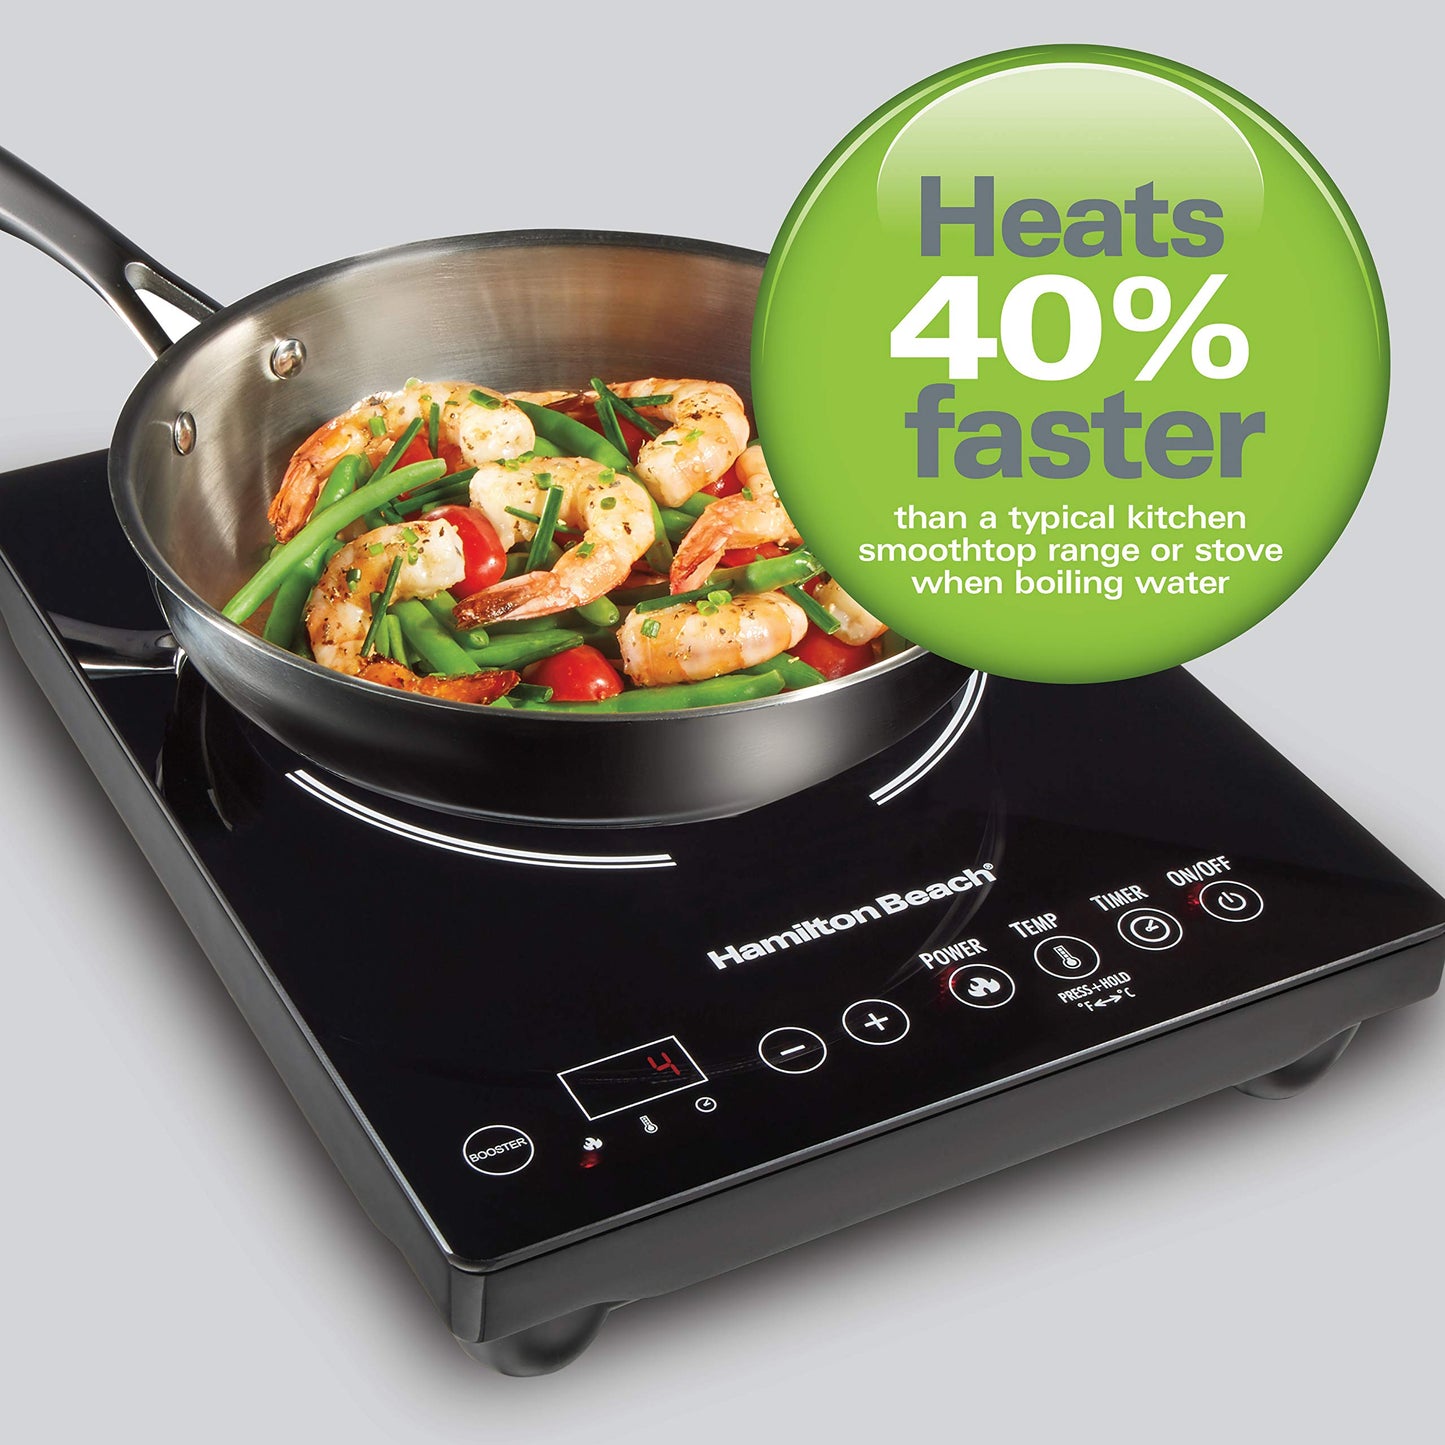 Hamilton Beach Portable Single Induction Cooktop Countertop Burner Hot Plate with Fast Heating Mode, 1800 Watts